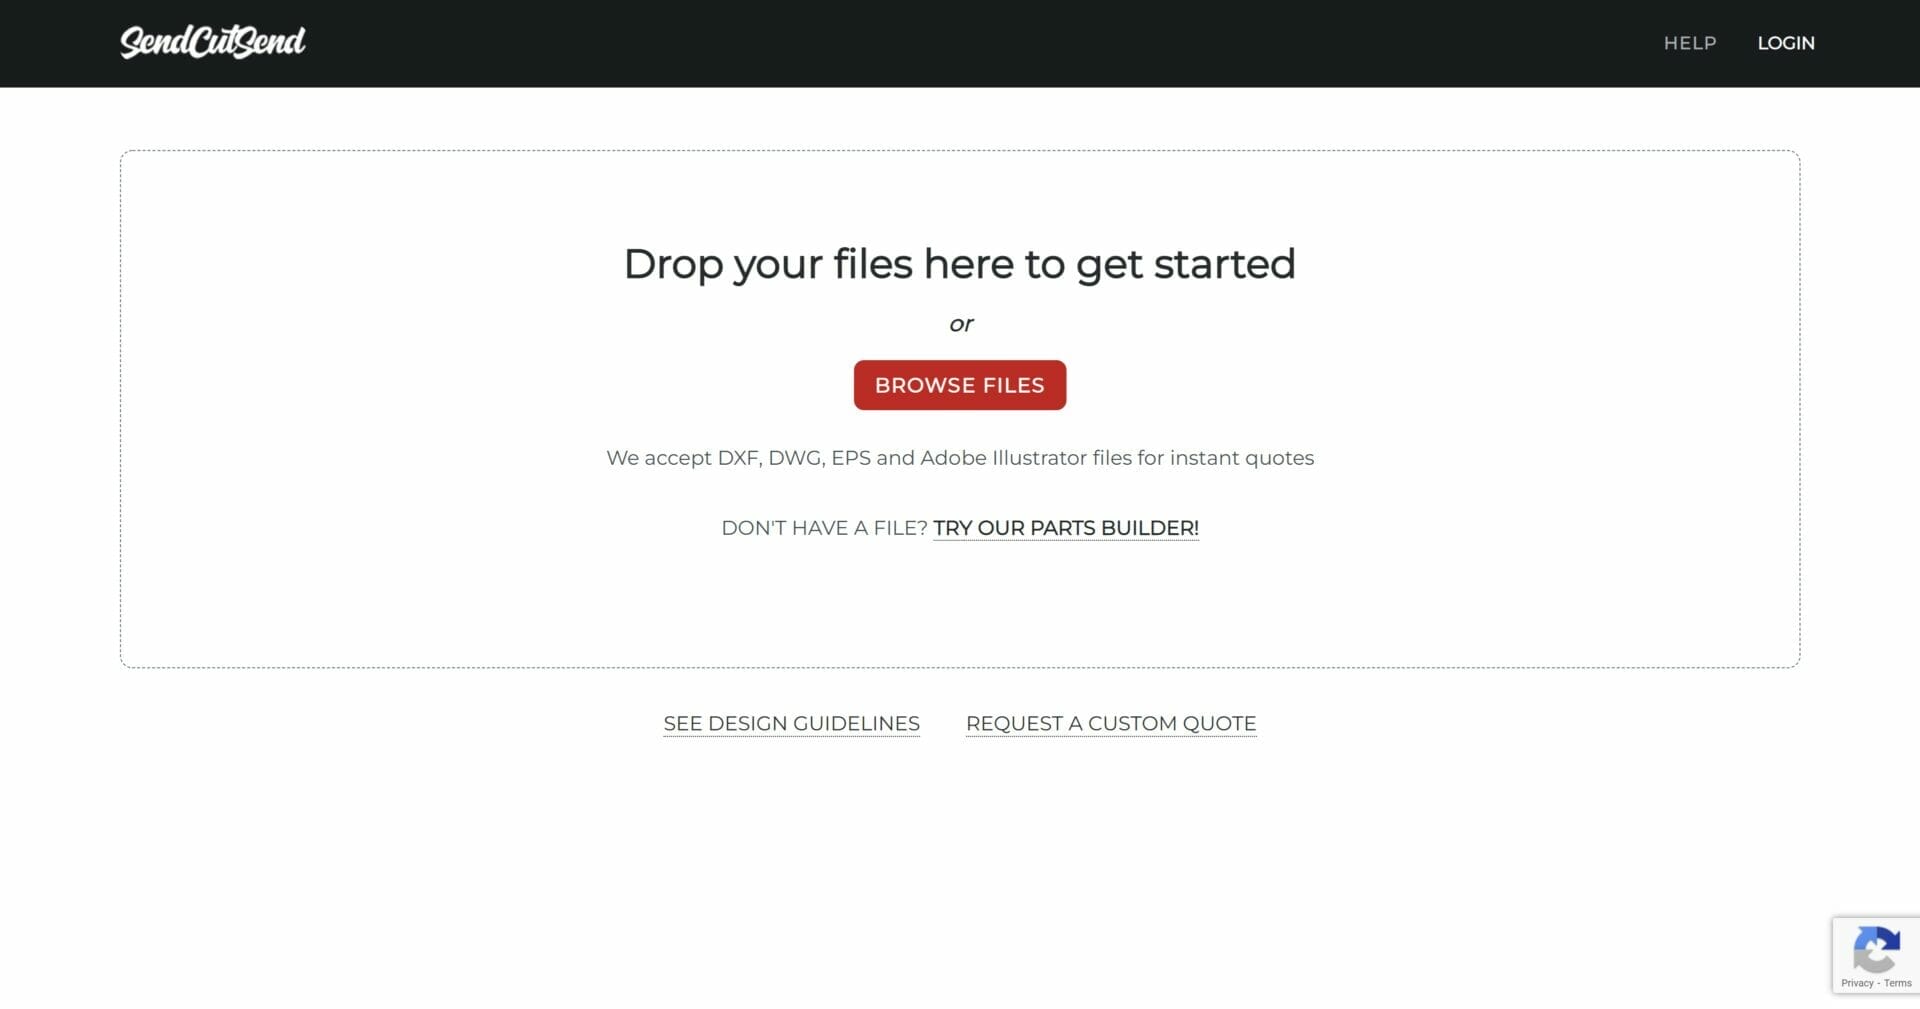 Screenshot of the opening screen for the SendCutSend ordering process with an interaction box that says "Drop your files here to get started" and a red "Browse Files" button